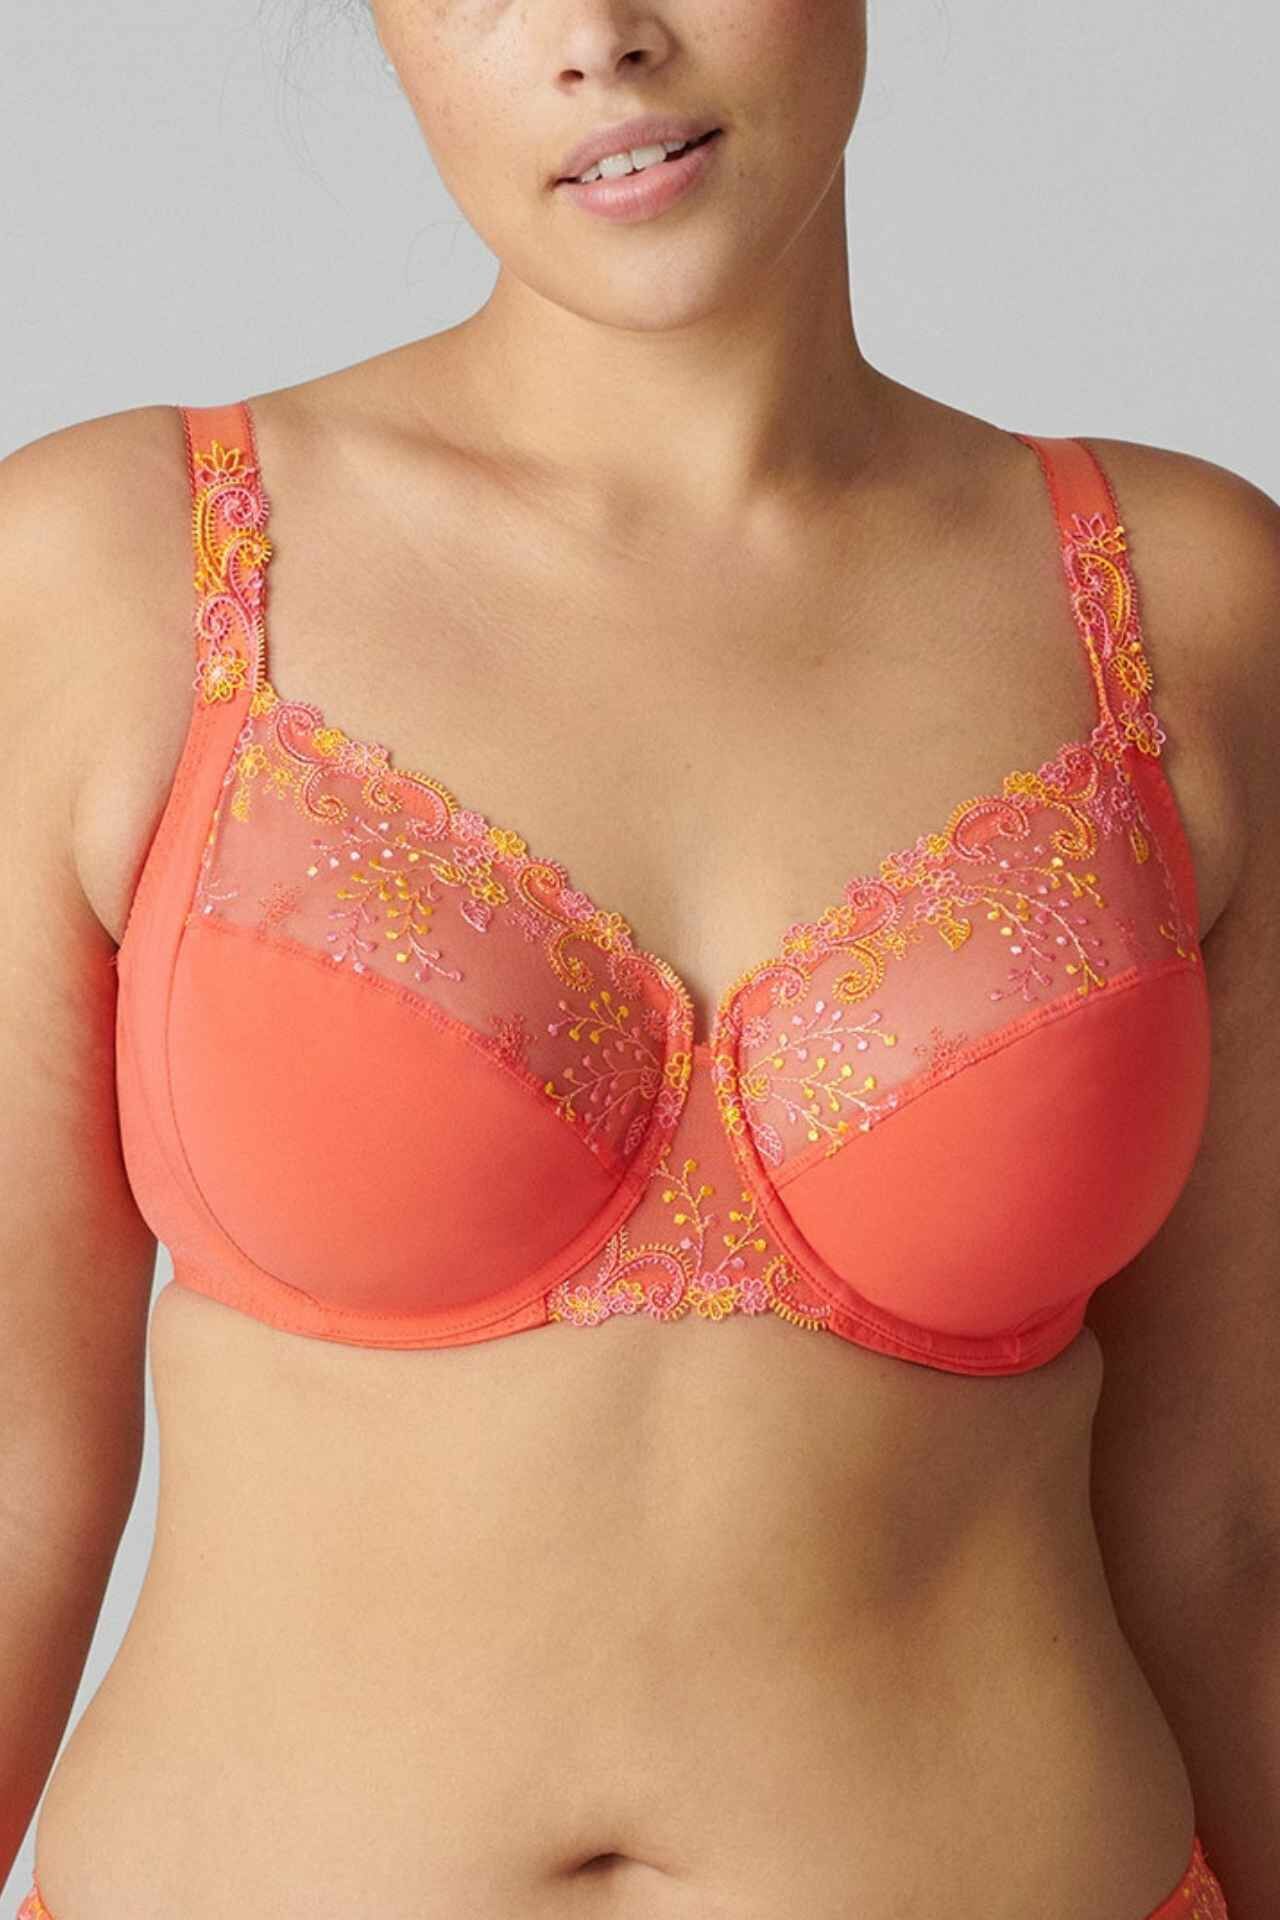 Simone Perele 12x Delice Half Cup Bra PEACH PINK buy for the best